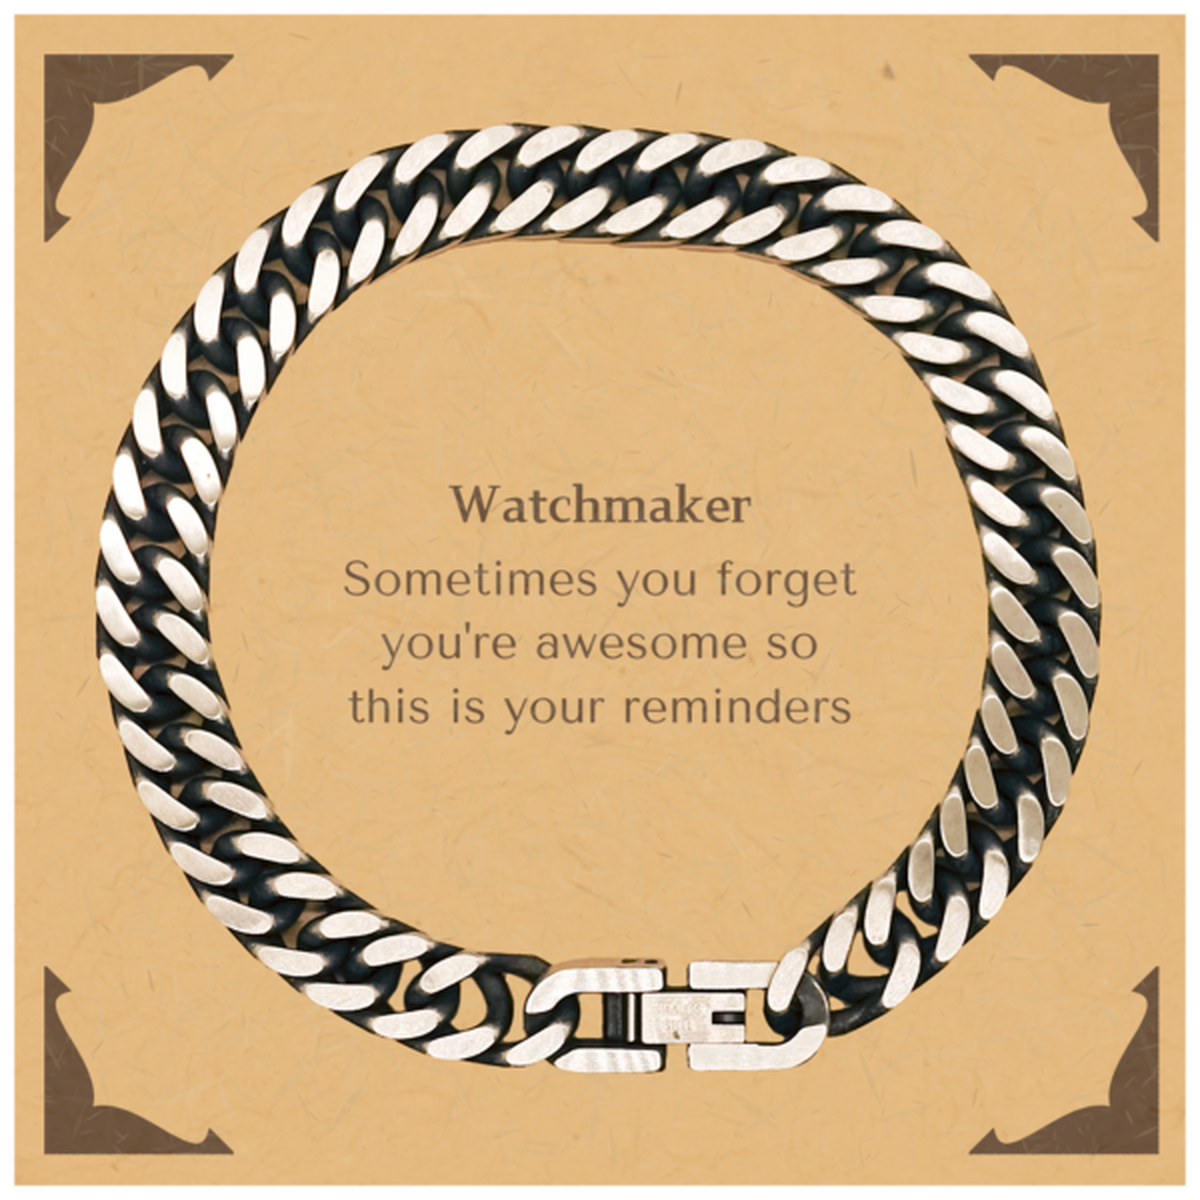 Sentimental Watchmaker Cuban Link Chain Bracelet, Watchmaker Sometimes you forget you're awesome so this is your reminders, Graduation Christmas Birthday Gifts for Watchmaker, Men, Women, Coworkers